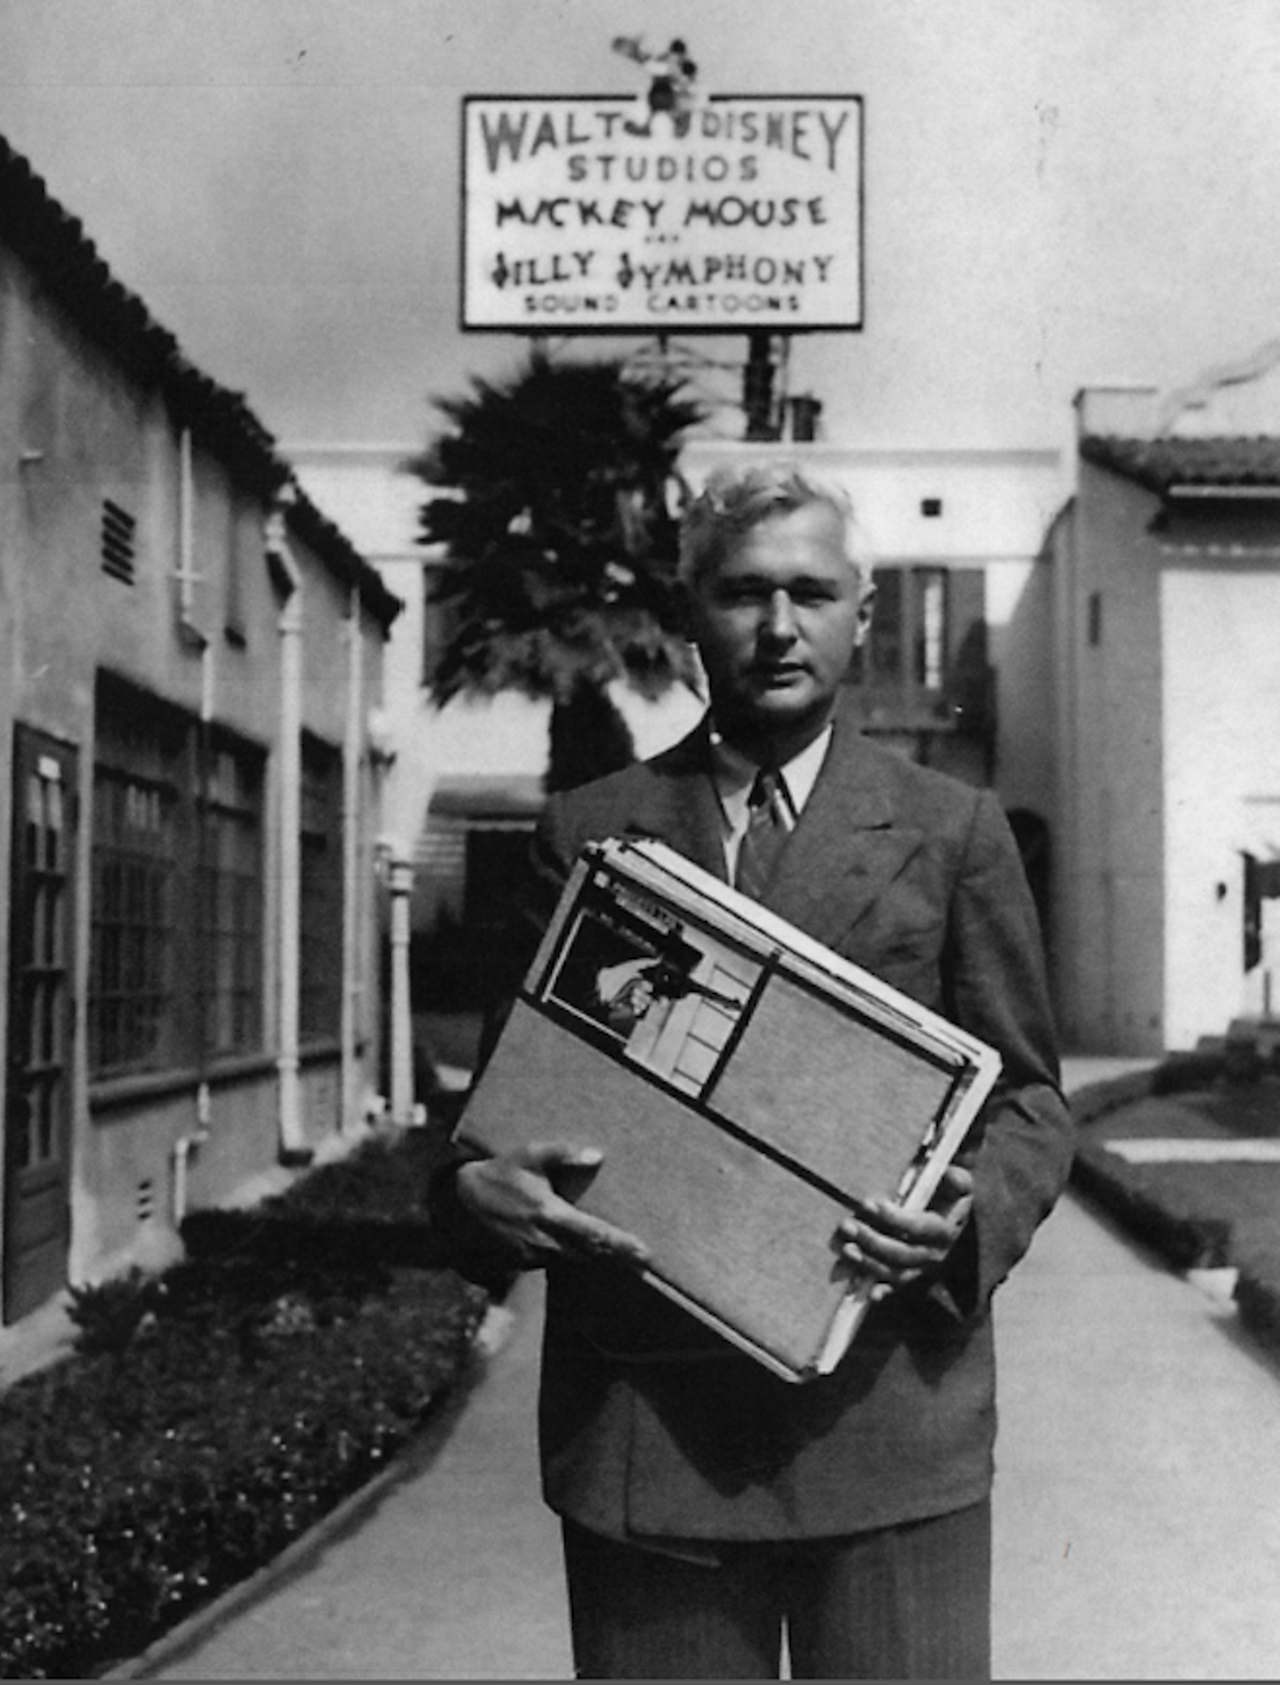 A photo of Schultheis outside of the Disney Hyperion Studios. Image courtesy of the Los Angeles Public Library Photo Collection